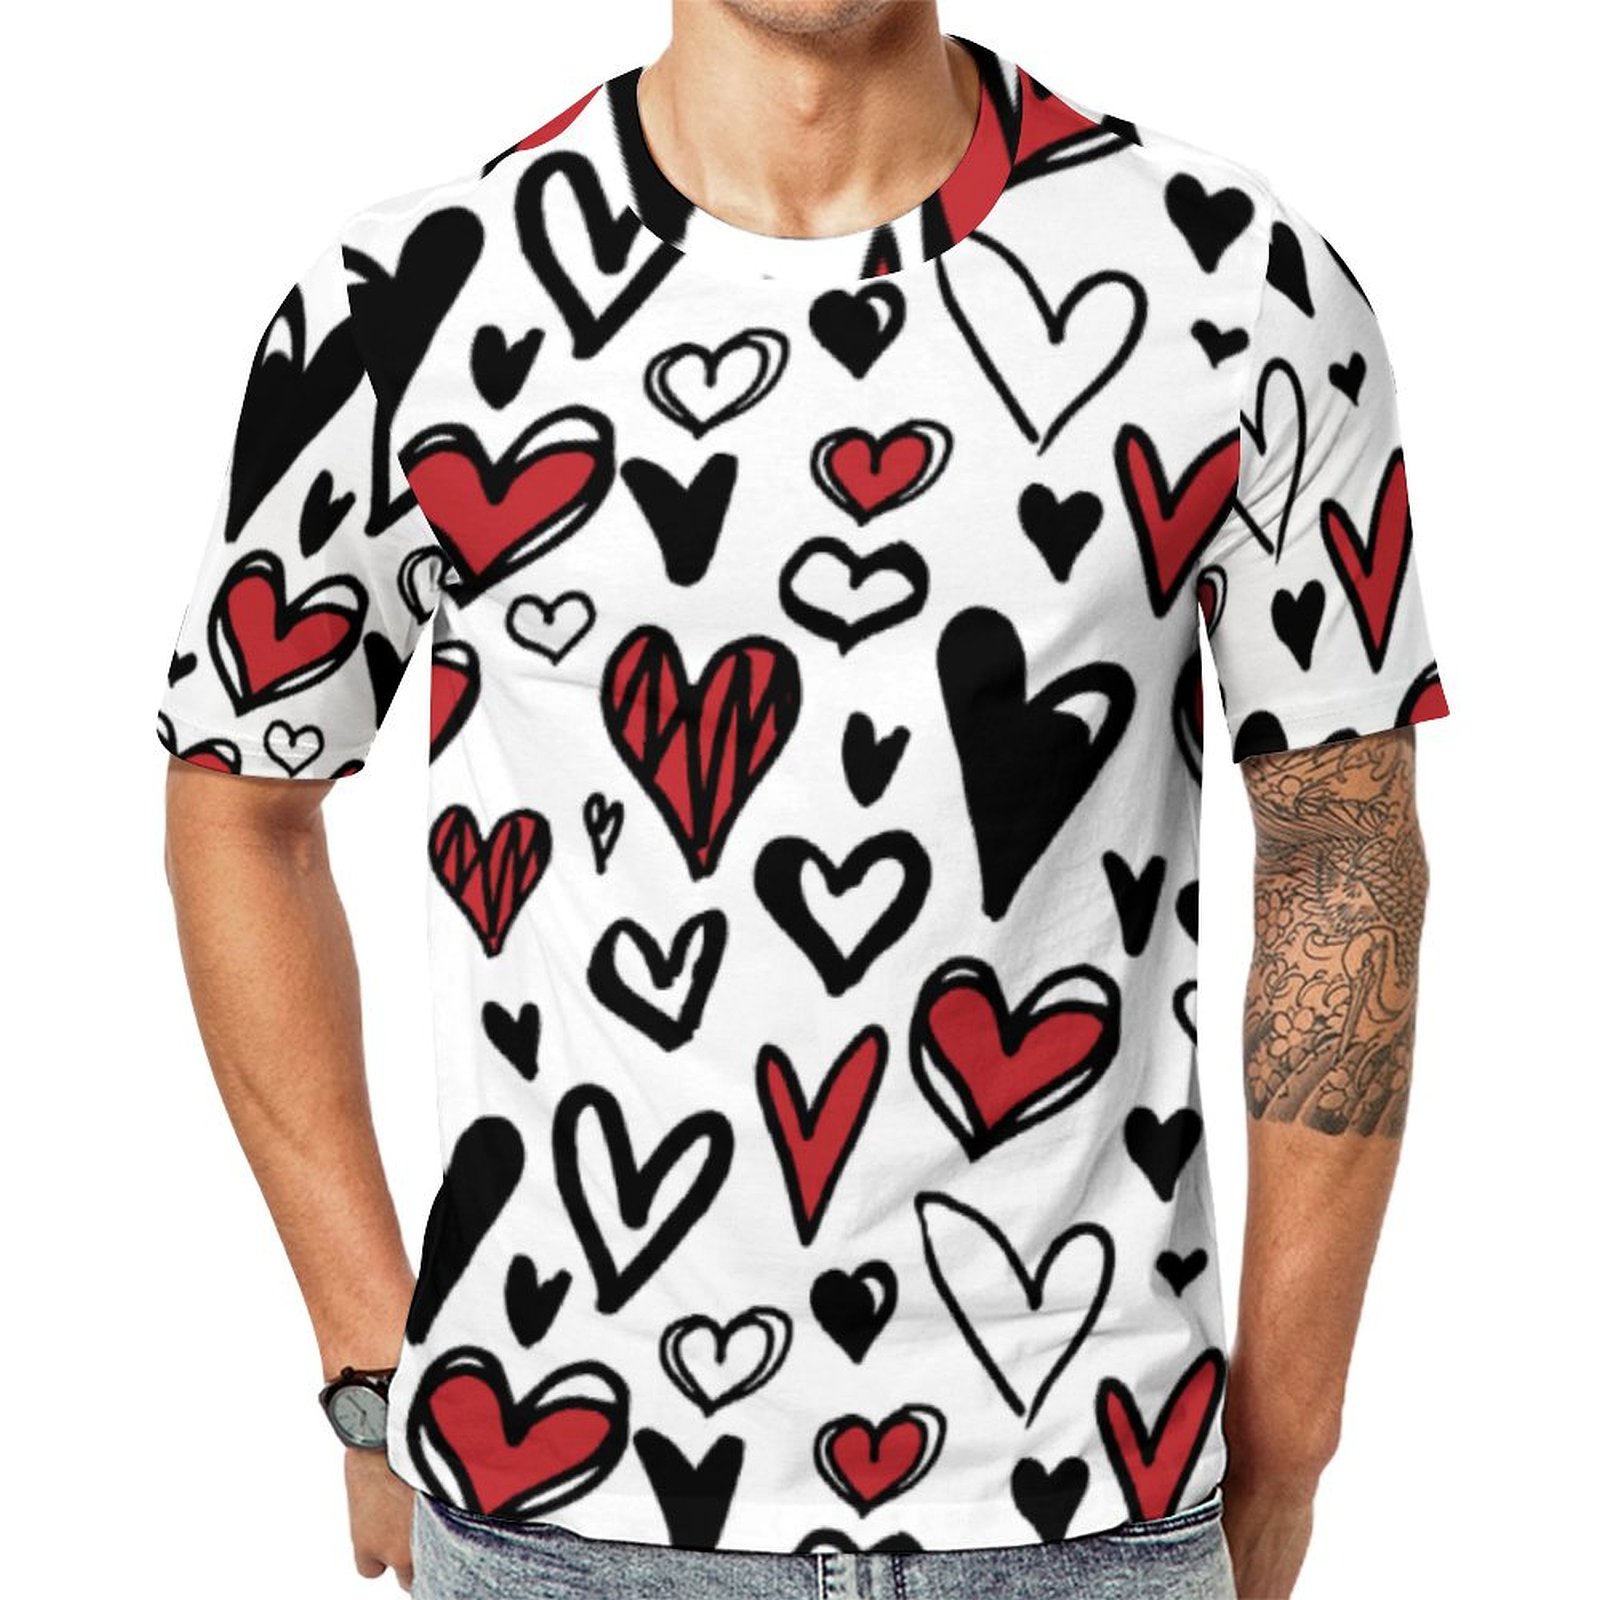 Hand Draw White Black And Red Heart Shape Women Short Sleeve Print Unisex Tshirt Summer Casual Tees for Men and Women Coolcoshirts